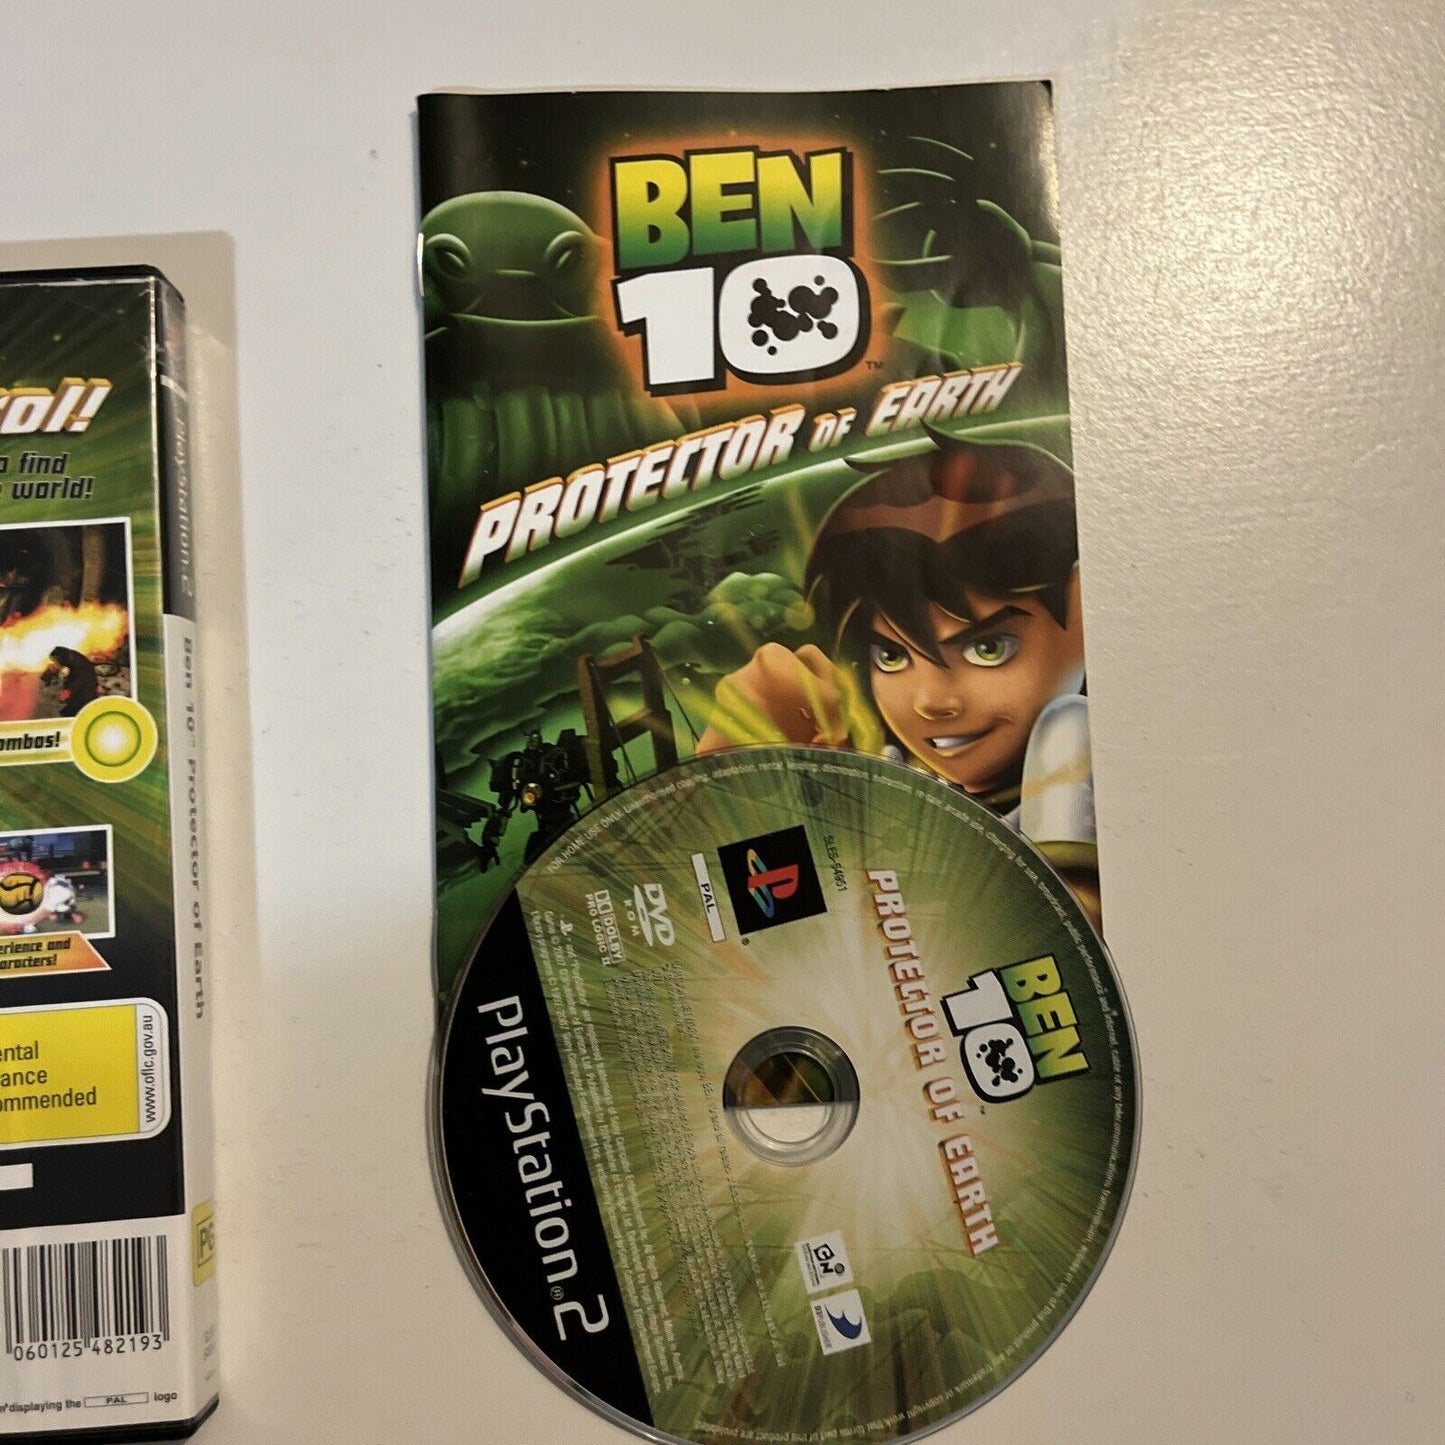 Ben 10 Protector of Earth - PS2 Playstation 2 PAL Game with Manual